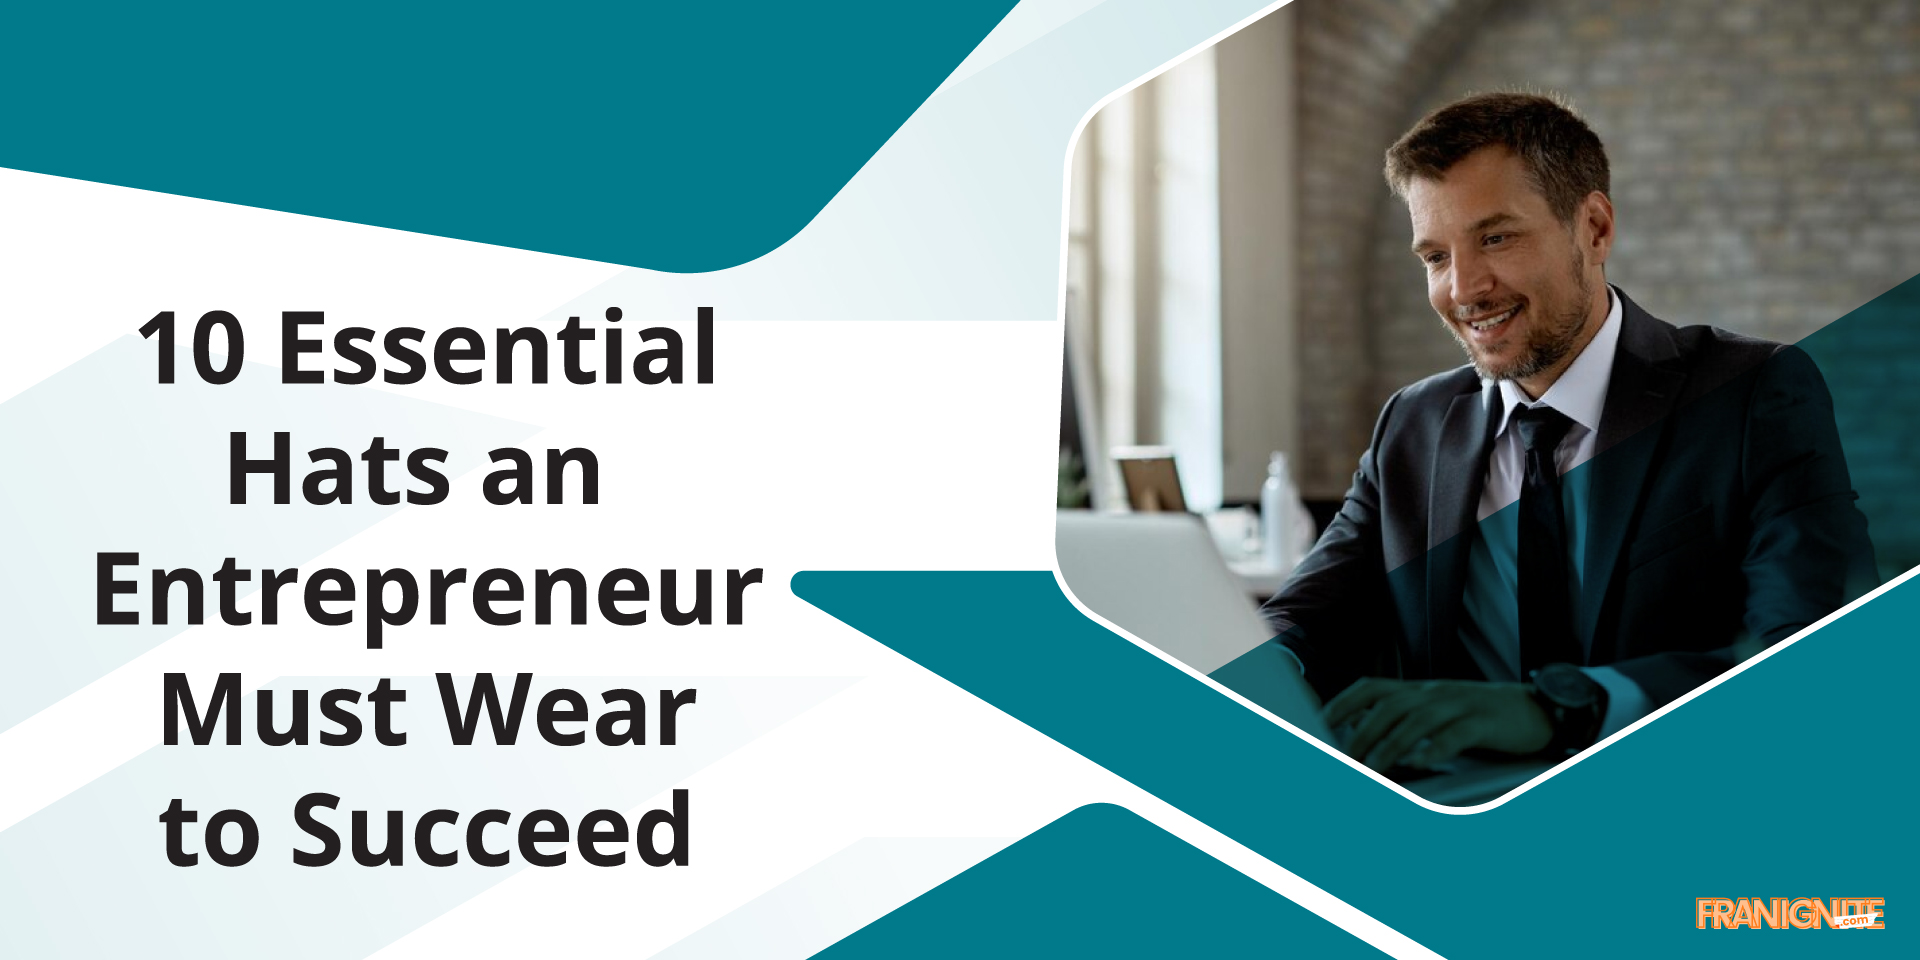 10 Essential Hats an Entrepreneur Must Wear to Succeed